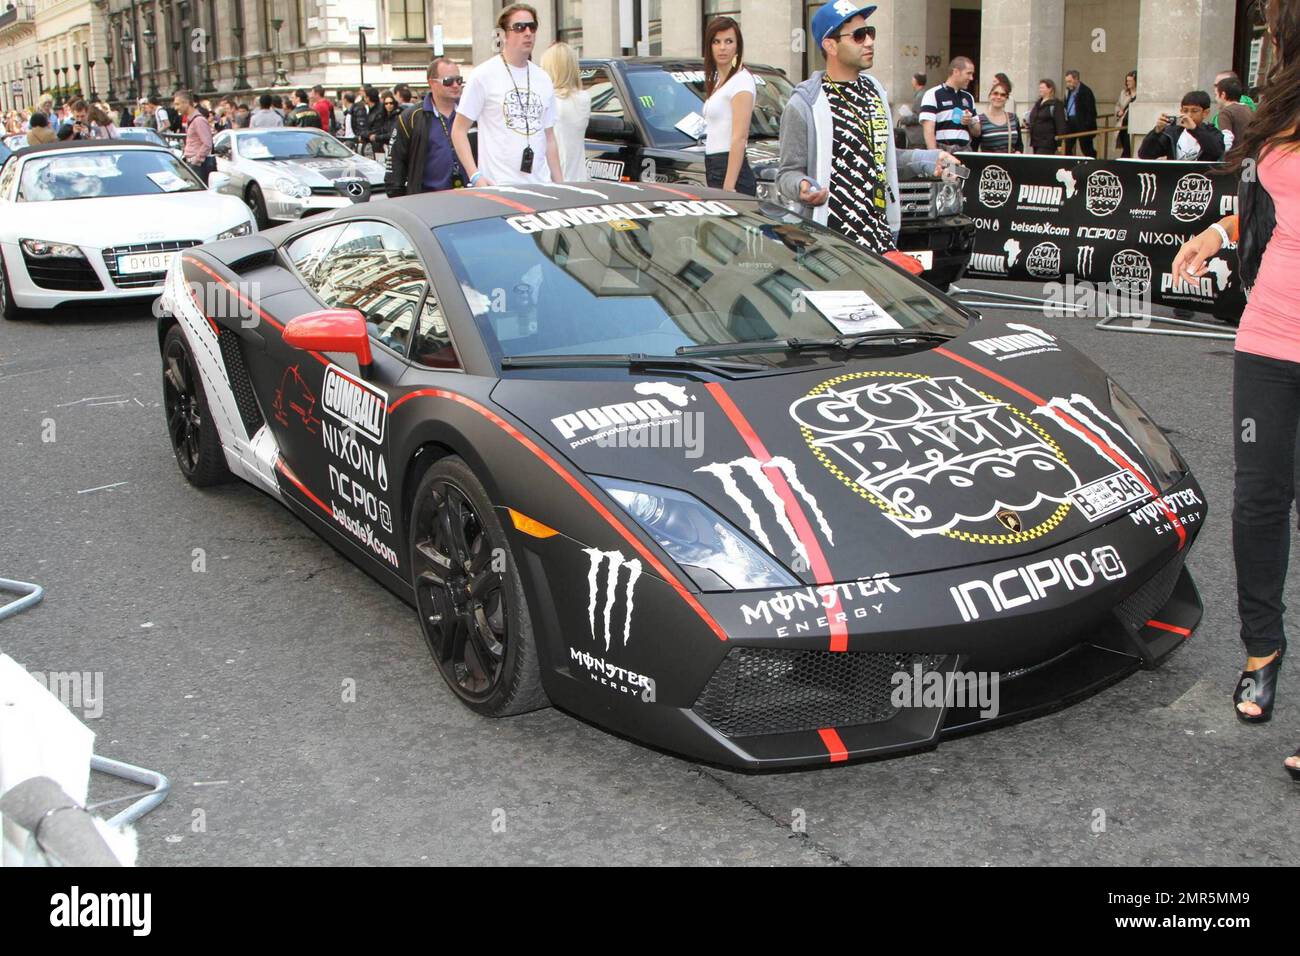 Cars on display at the 11th annual Gumball 3000 rally race, which kicks off  in London and will see participants race through the streets of Amsterdam,  Copenhagen, Stockholm, Boston, Quebec City, Toronto